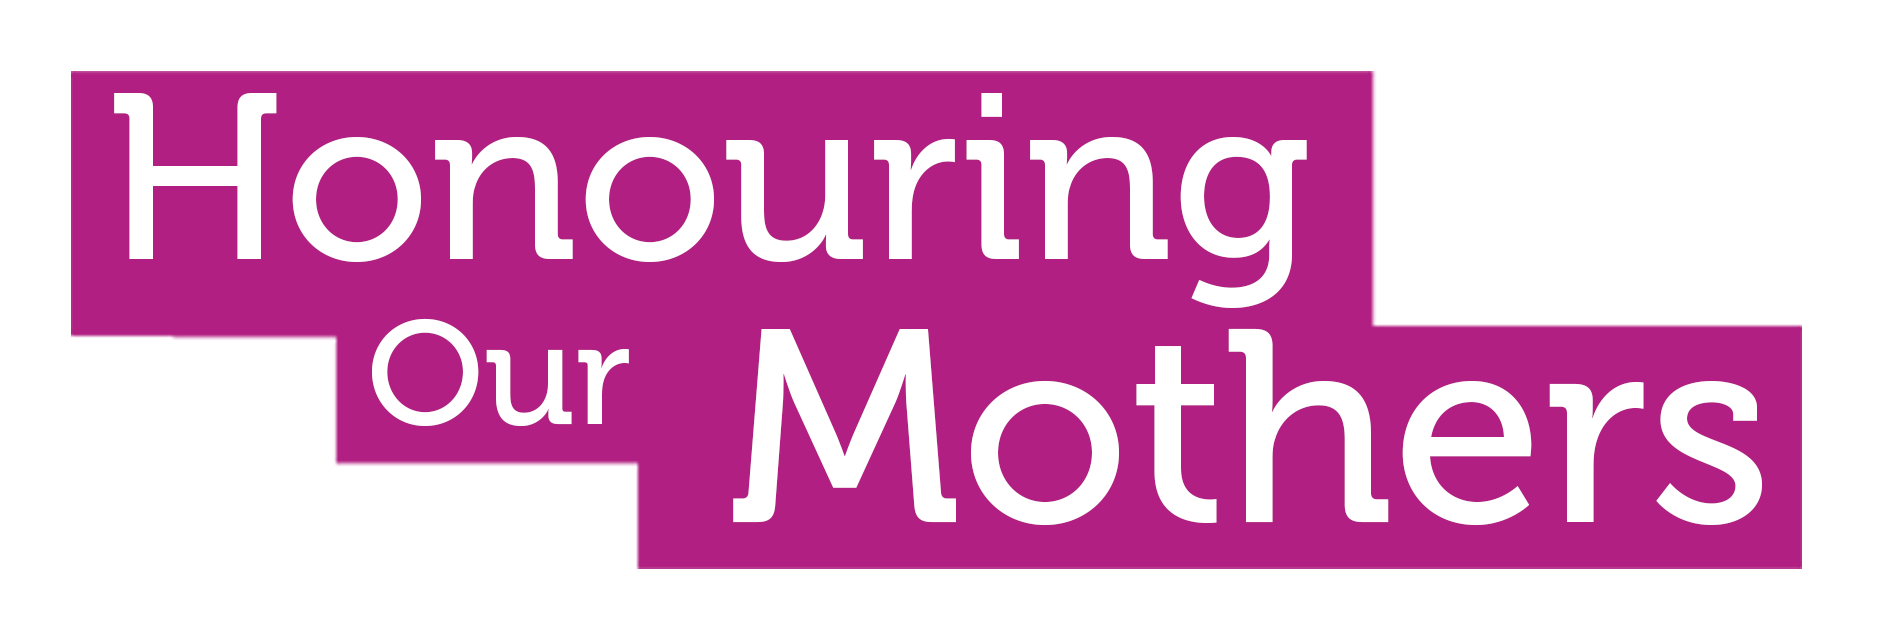 Honouring Our Mothers